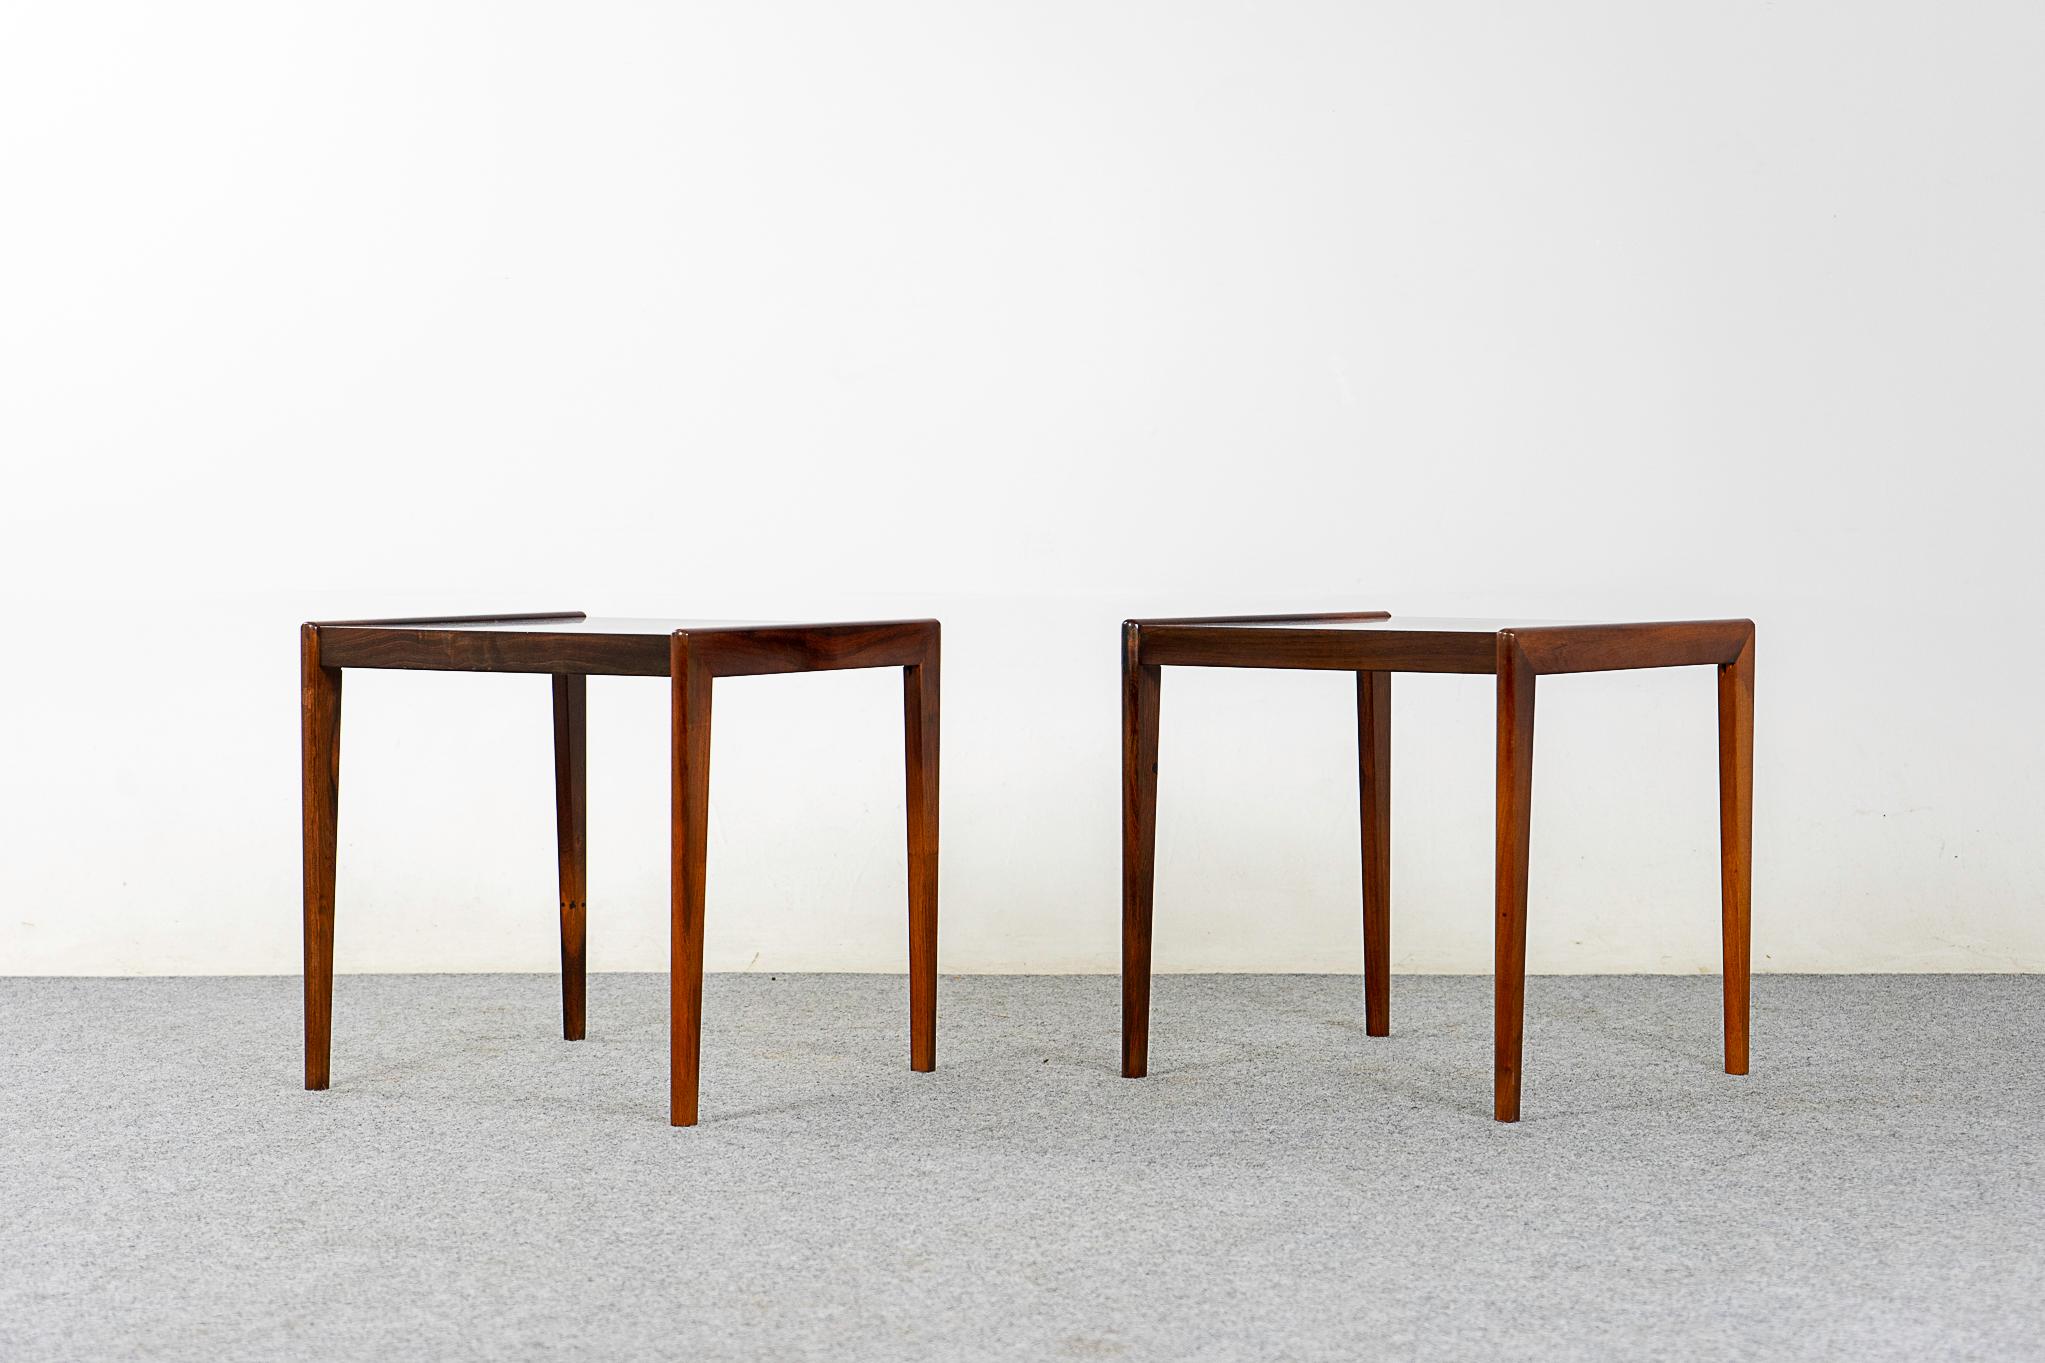 Rosewood side table pair, circa 1960's. Solid wood base and handsome book-matched veneer tops. Make the most of your space with this charming duo.

Please inquire for remote and international shipping rates.